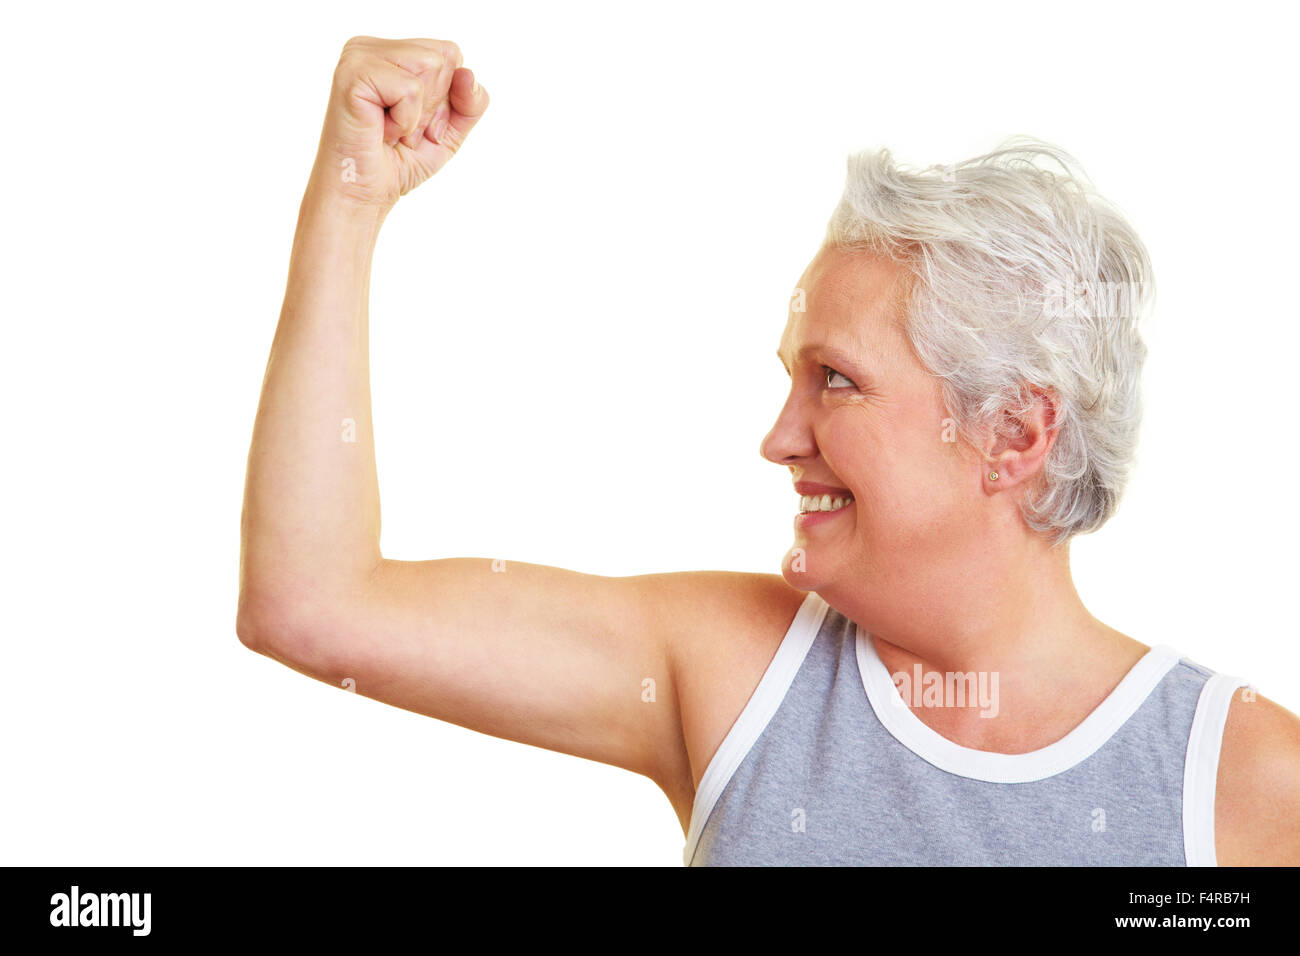 Happy senior woman showing her upper arm muscles Stock Photo